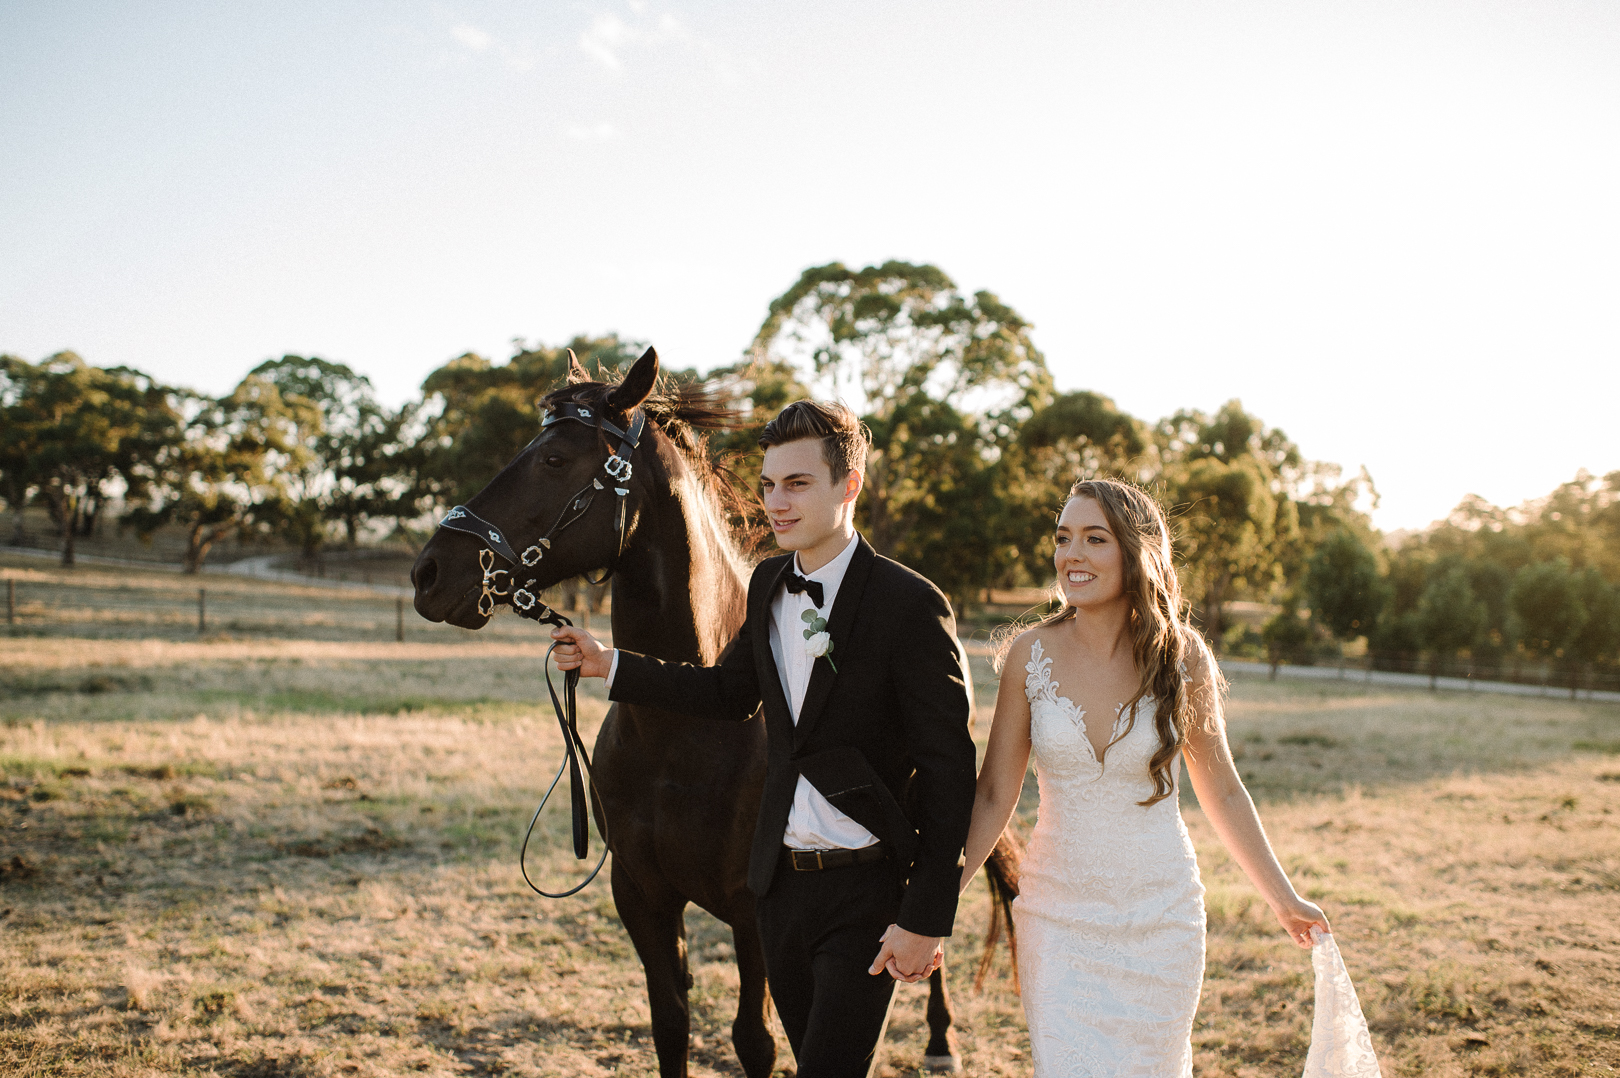 Secret Horse Stud, Brin Farm, Wedding Venue located just around the corner from Clarendon, Kuitpo Forest and Kangarilla offering flexible spaces, BYO alcohol, catering and suppliers.